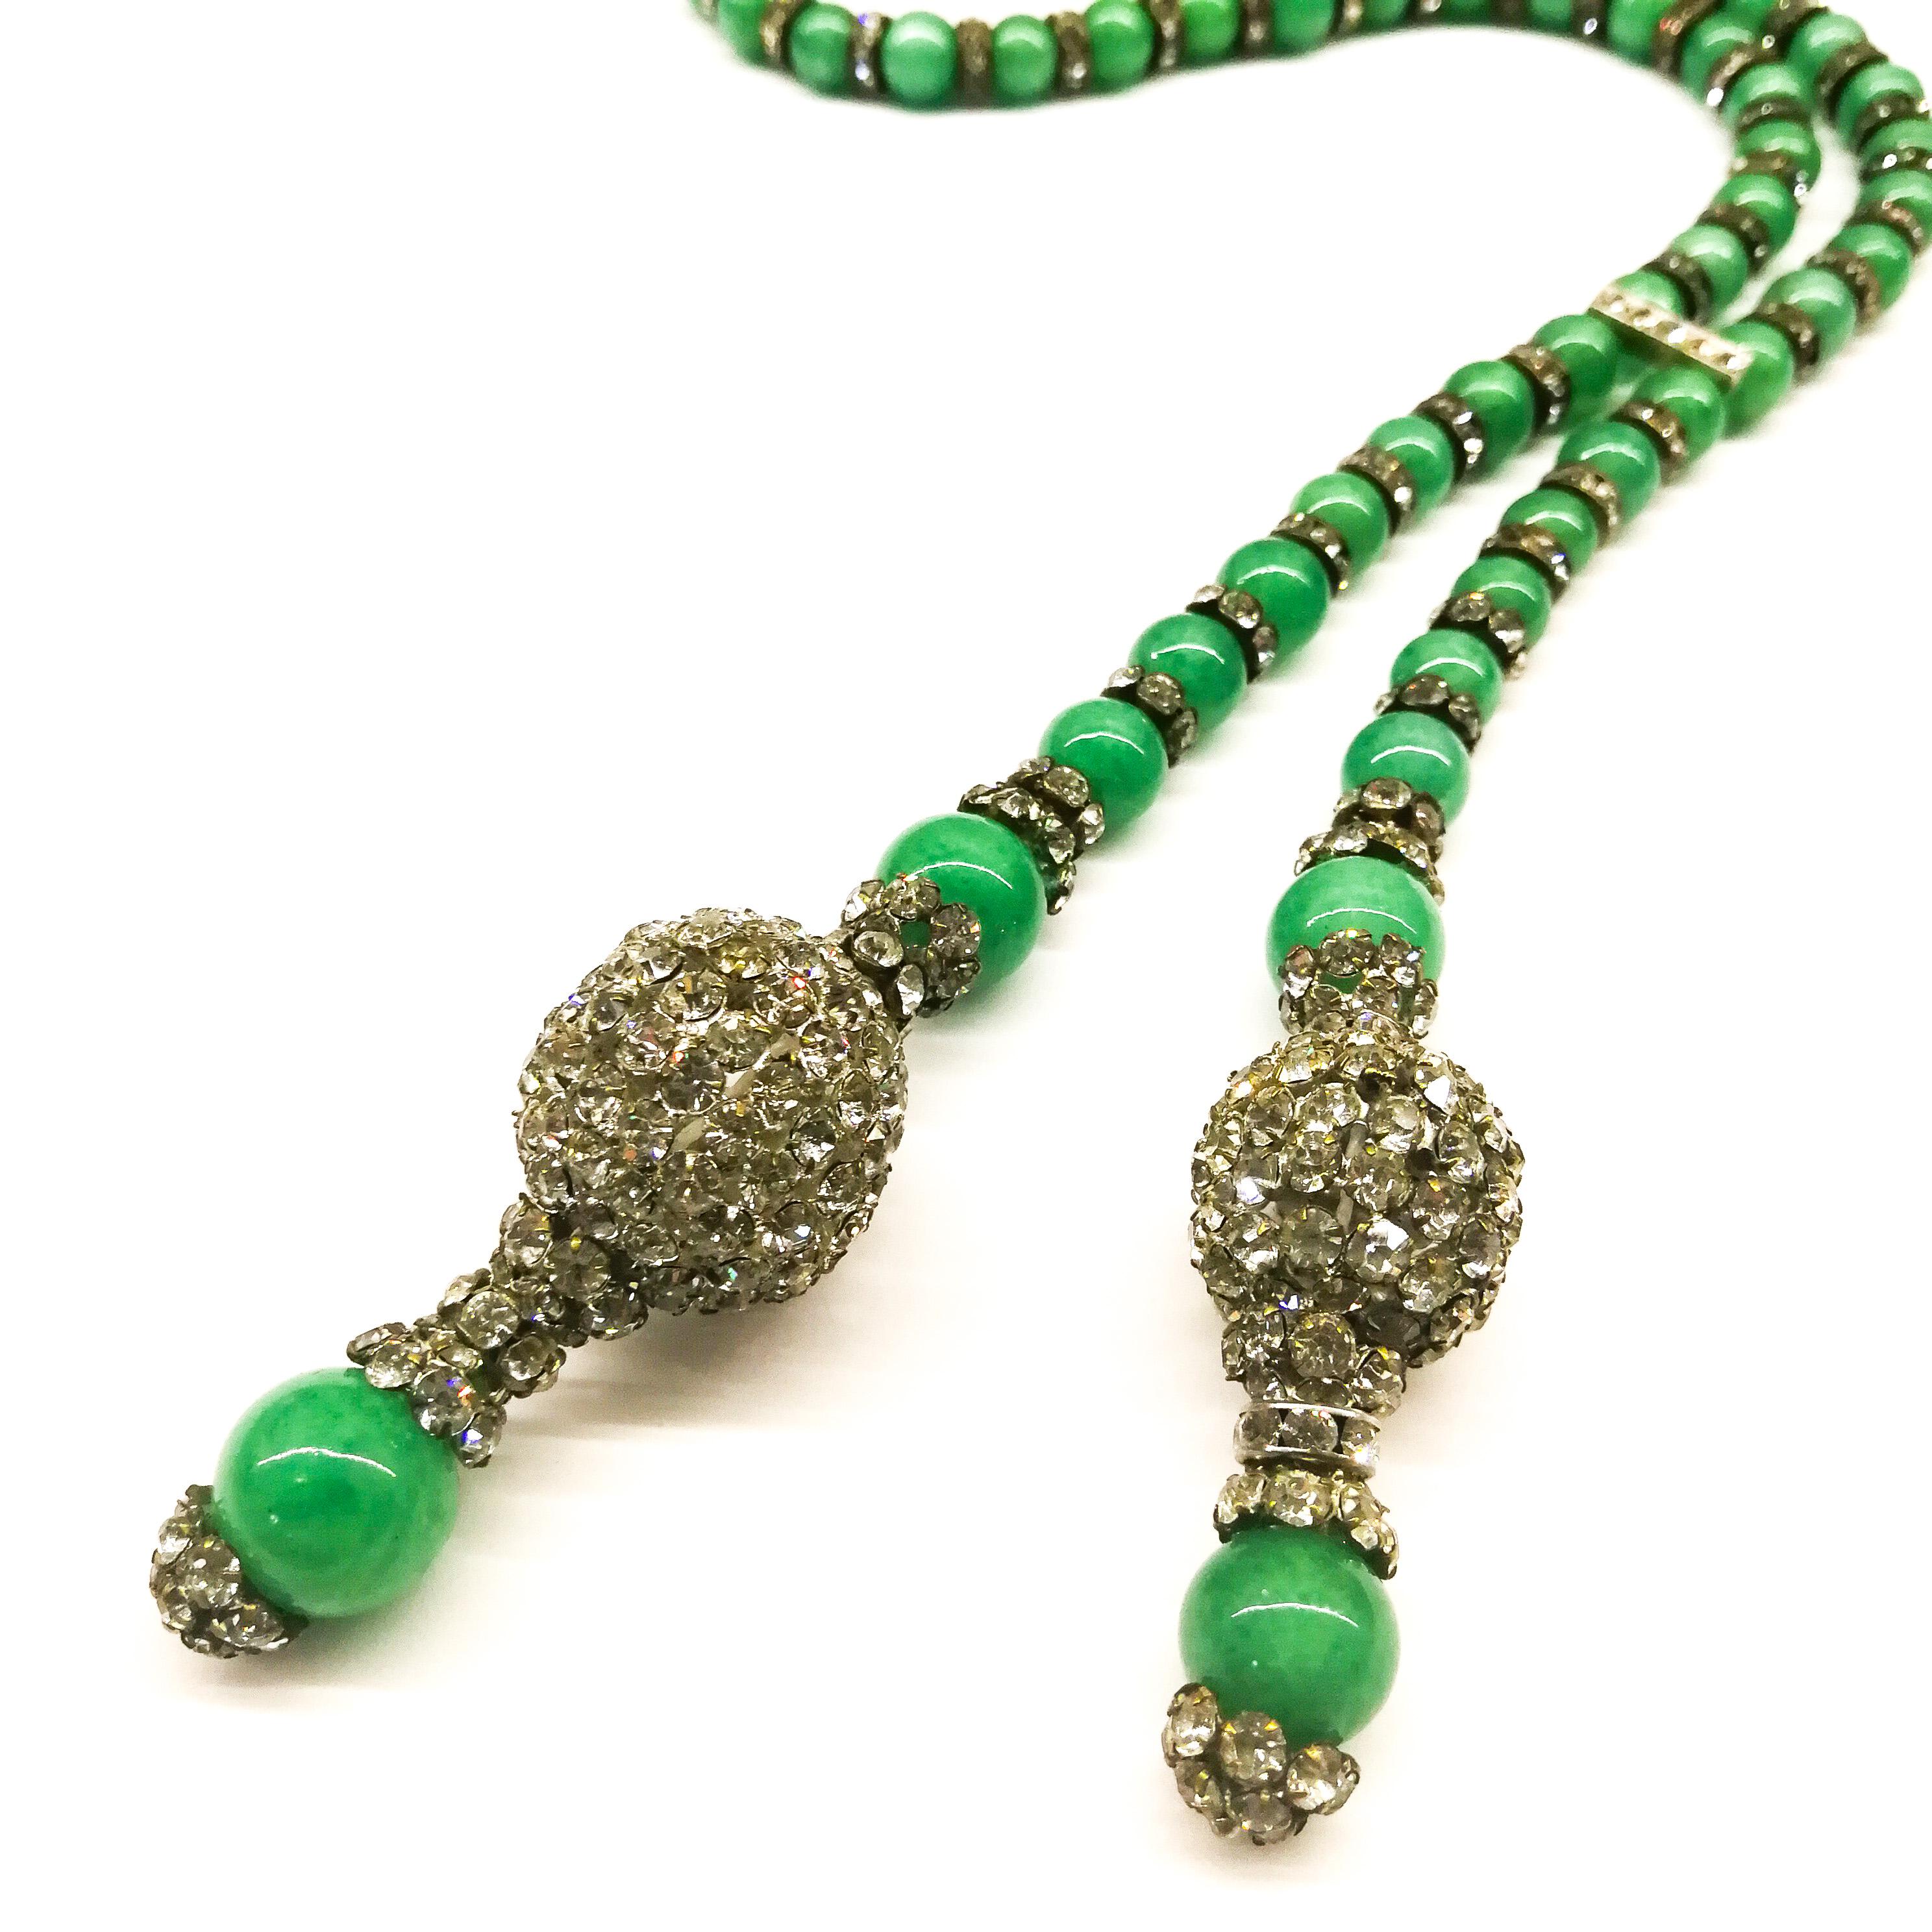 1920s style necklace